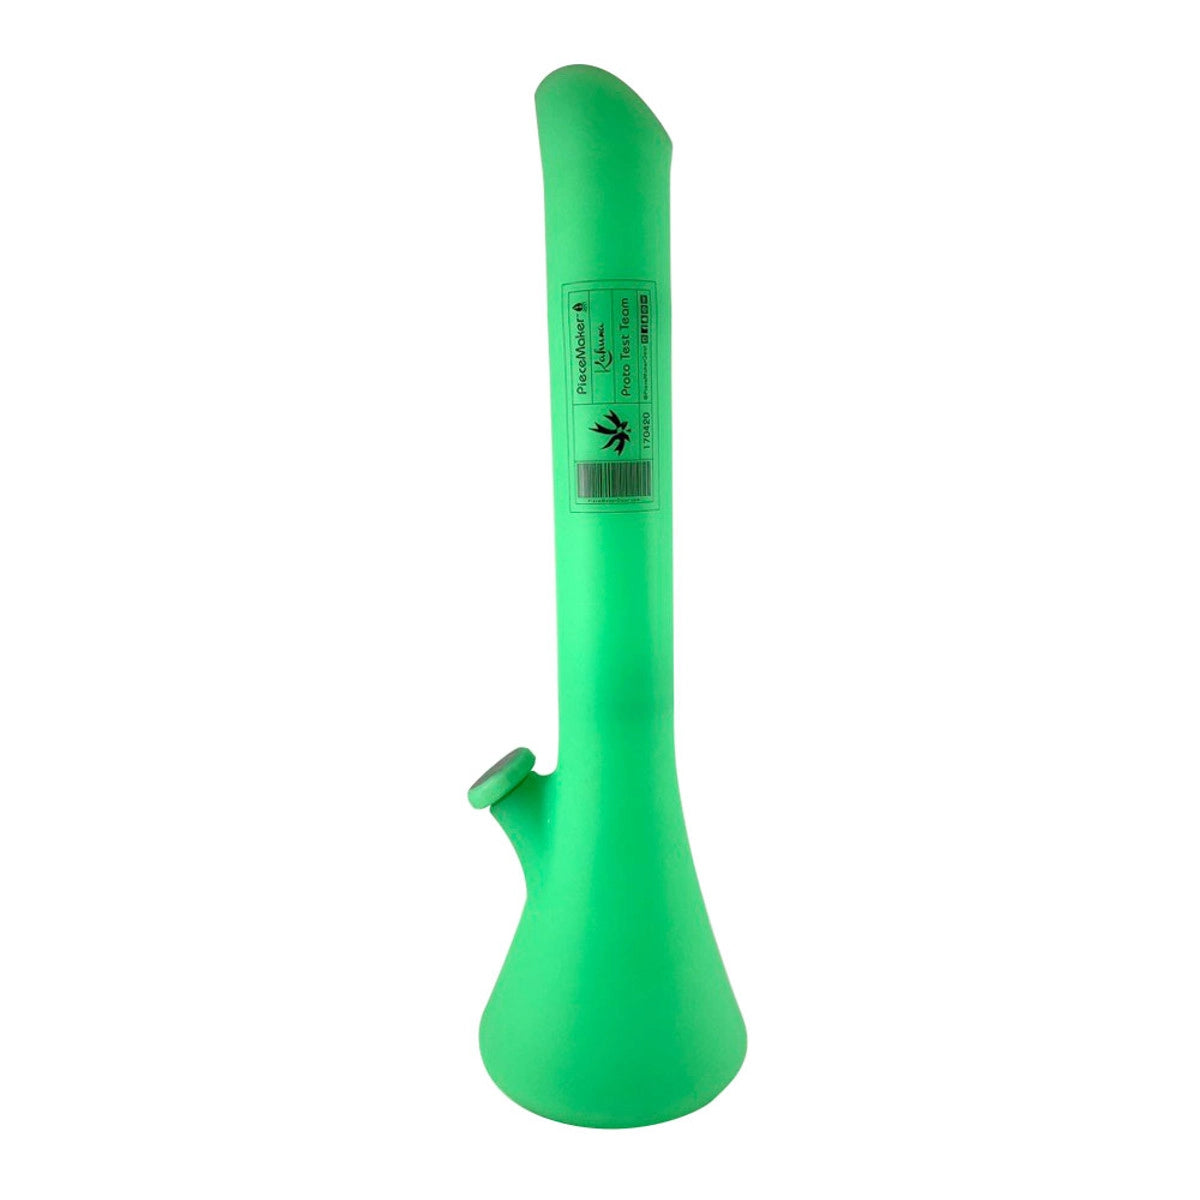 These PieceMaker Kahuna Silicone Waterpipes are a whopping 21.5" tall, made of food-grade silicone (bodies and caps), have removable silicone downstems, stainless steel bowls, built-in lighter holders, ice catches, and splash guards.